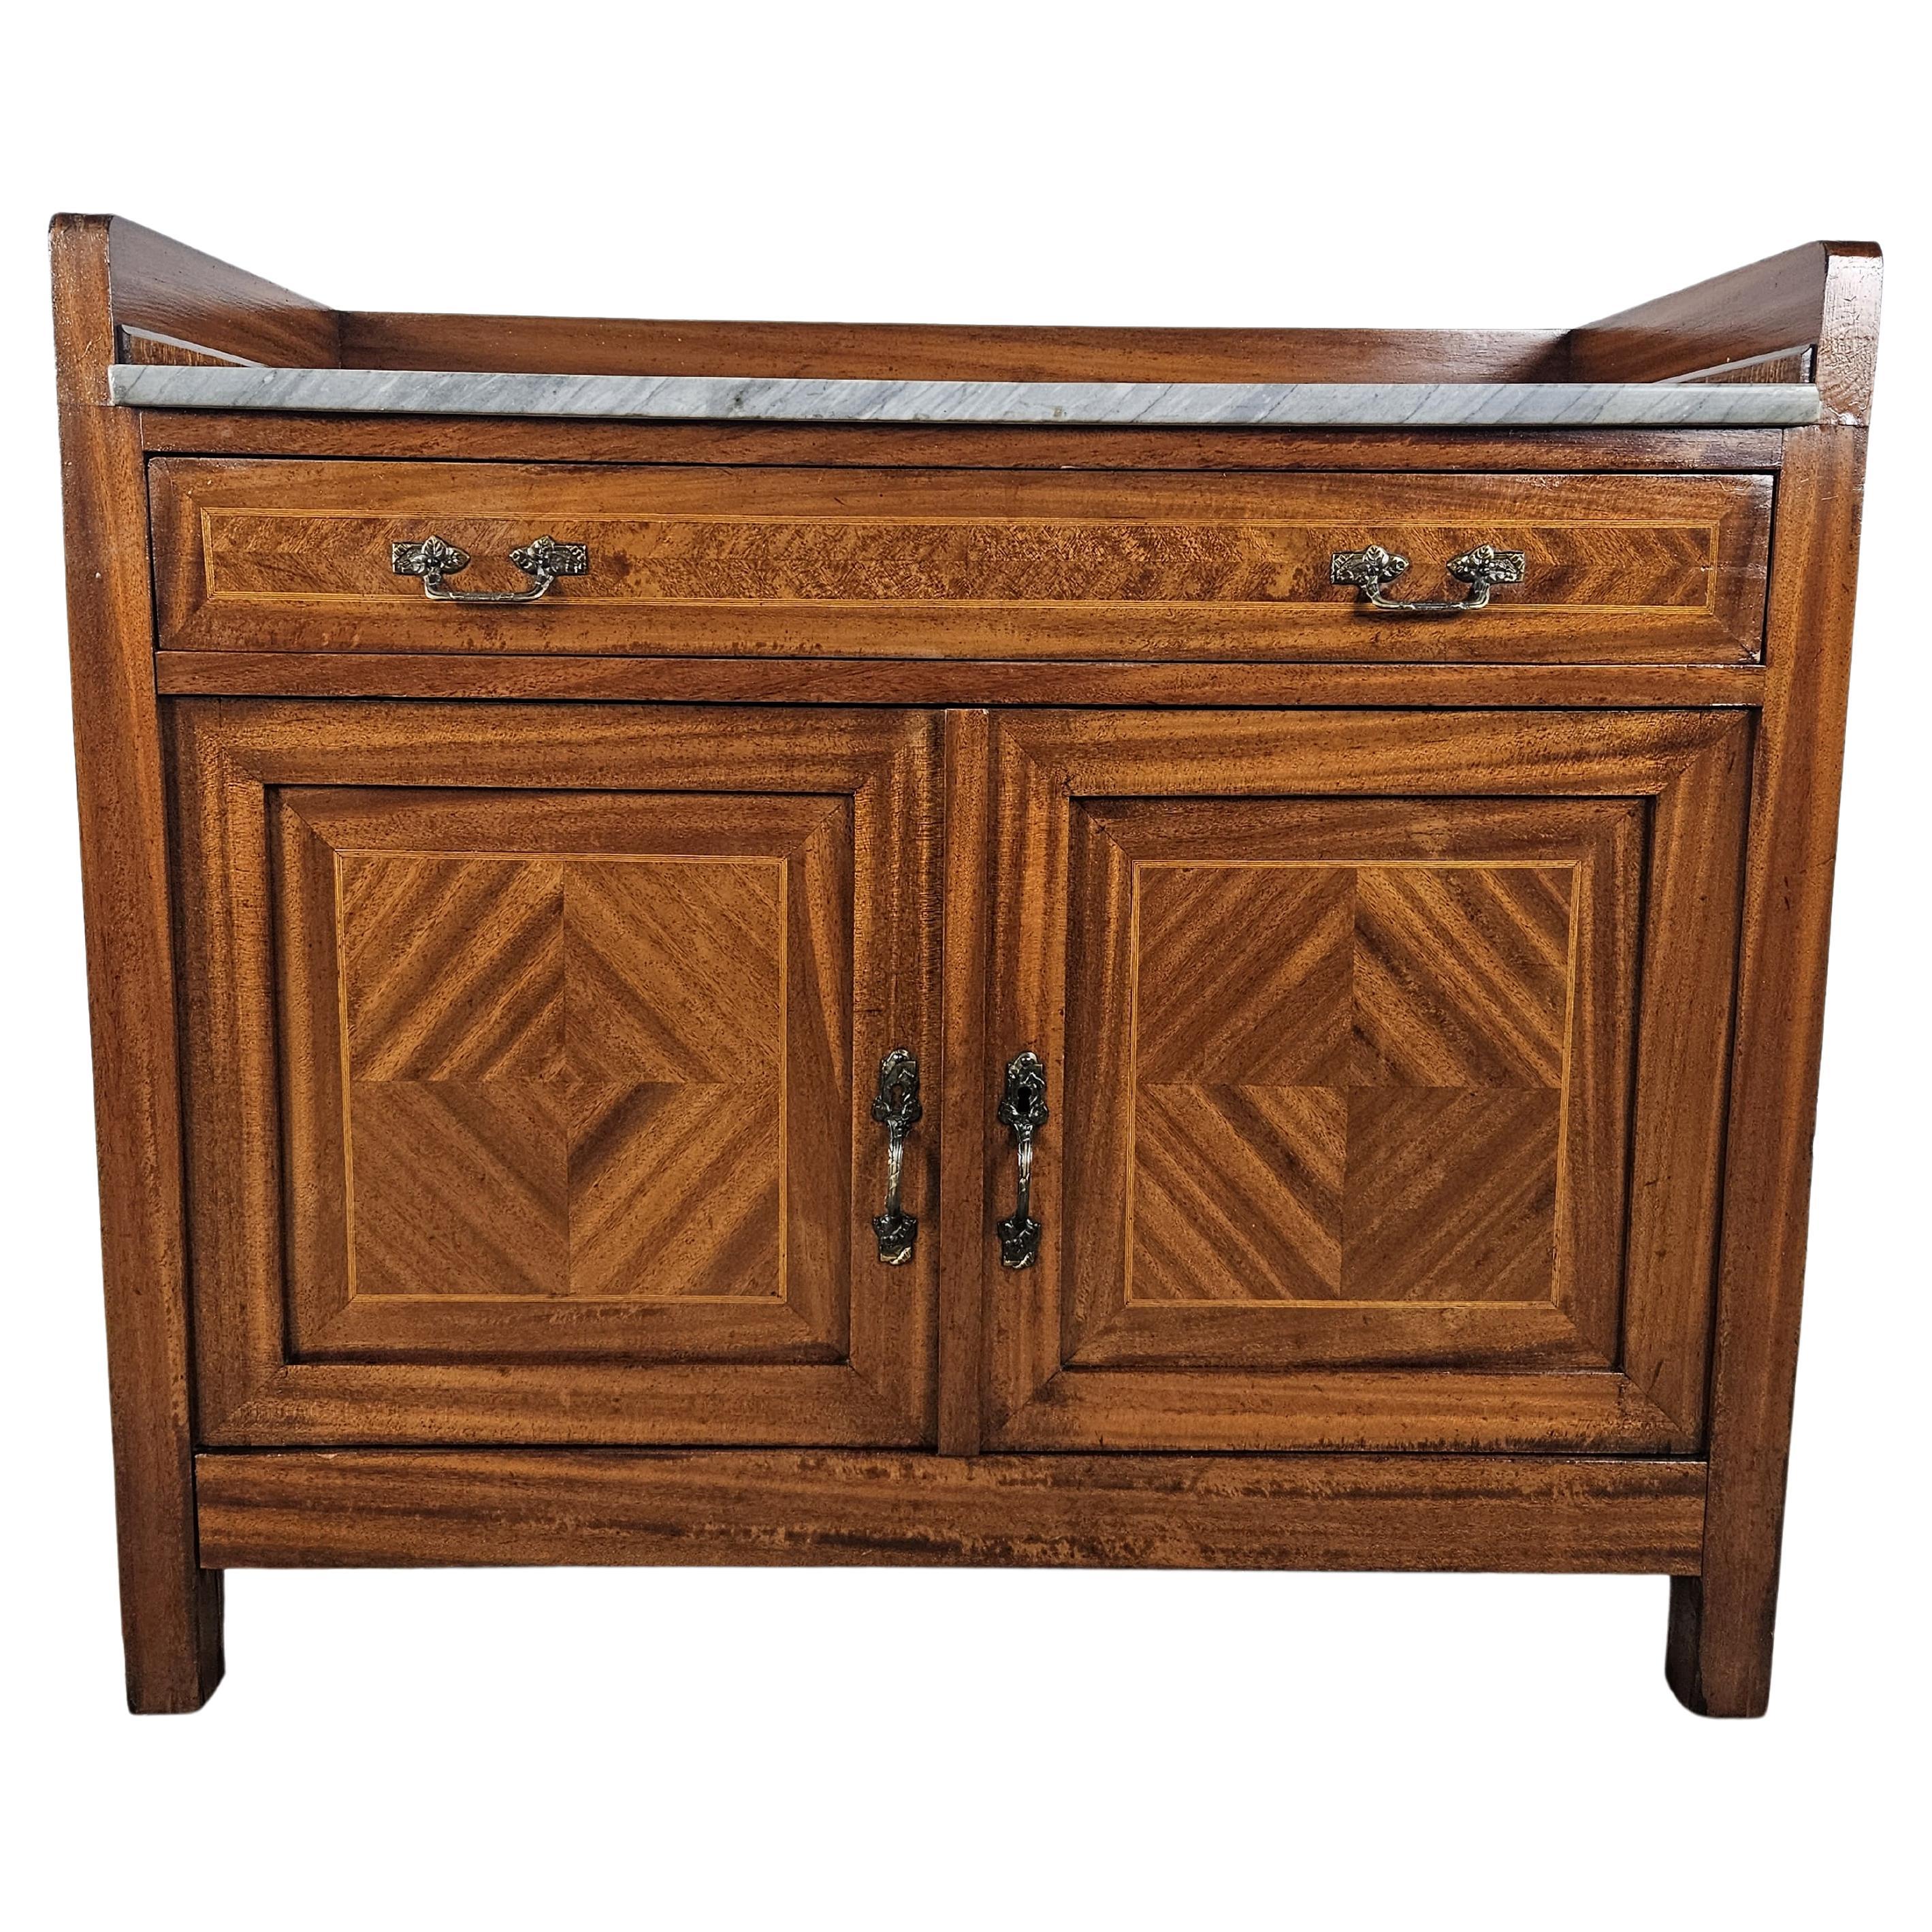 Art Nouveau walnut sideboard with marble top 20th century For Sale